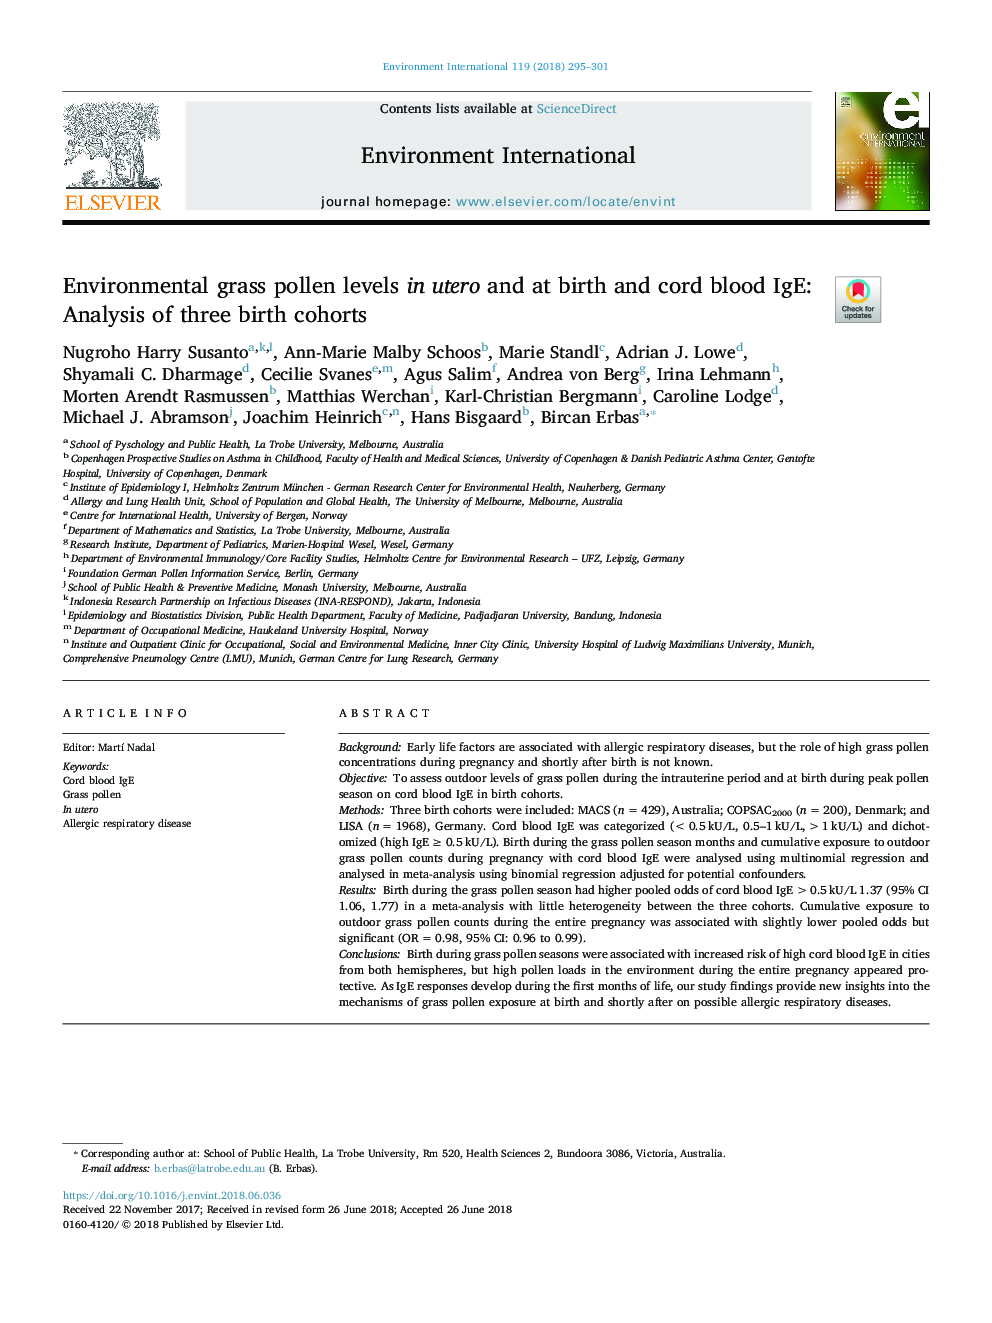 Environmental grass pollen levels in utero and at birth and cord blood IgE: Analysis of three birth cohorts